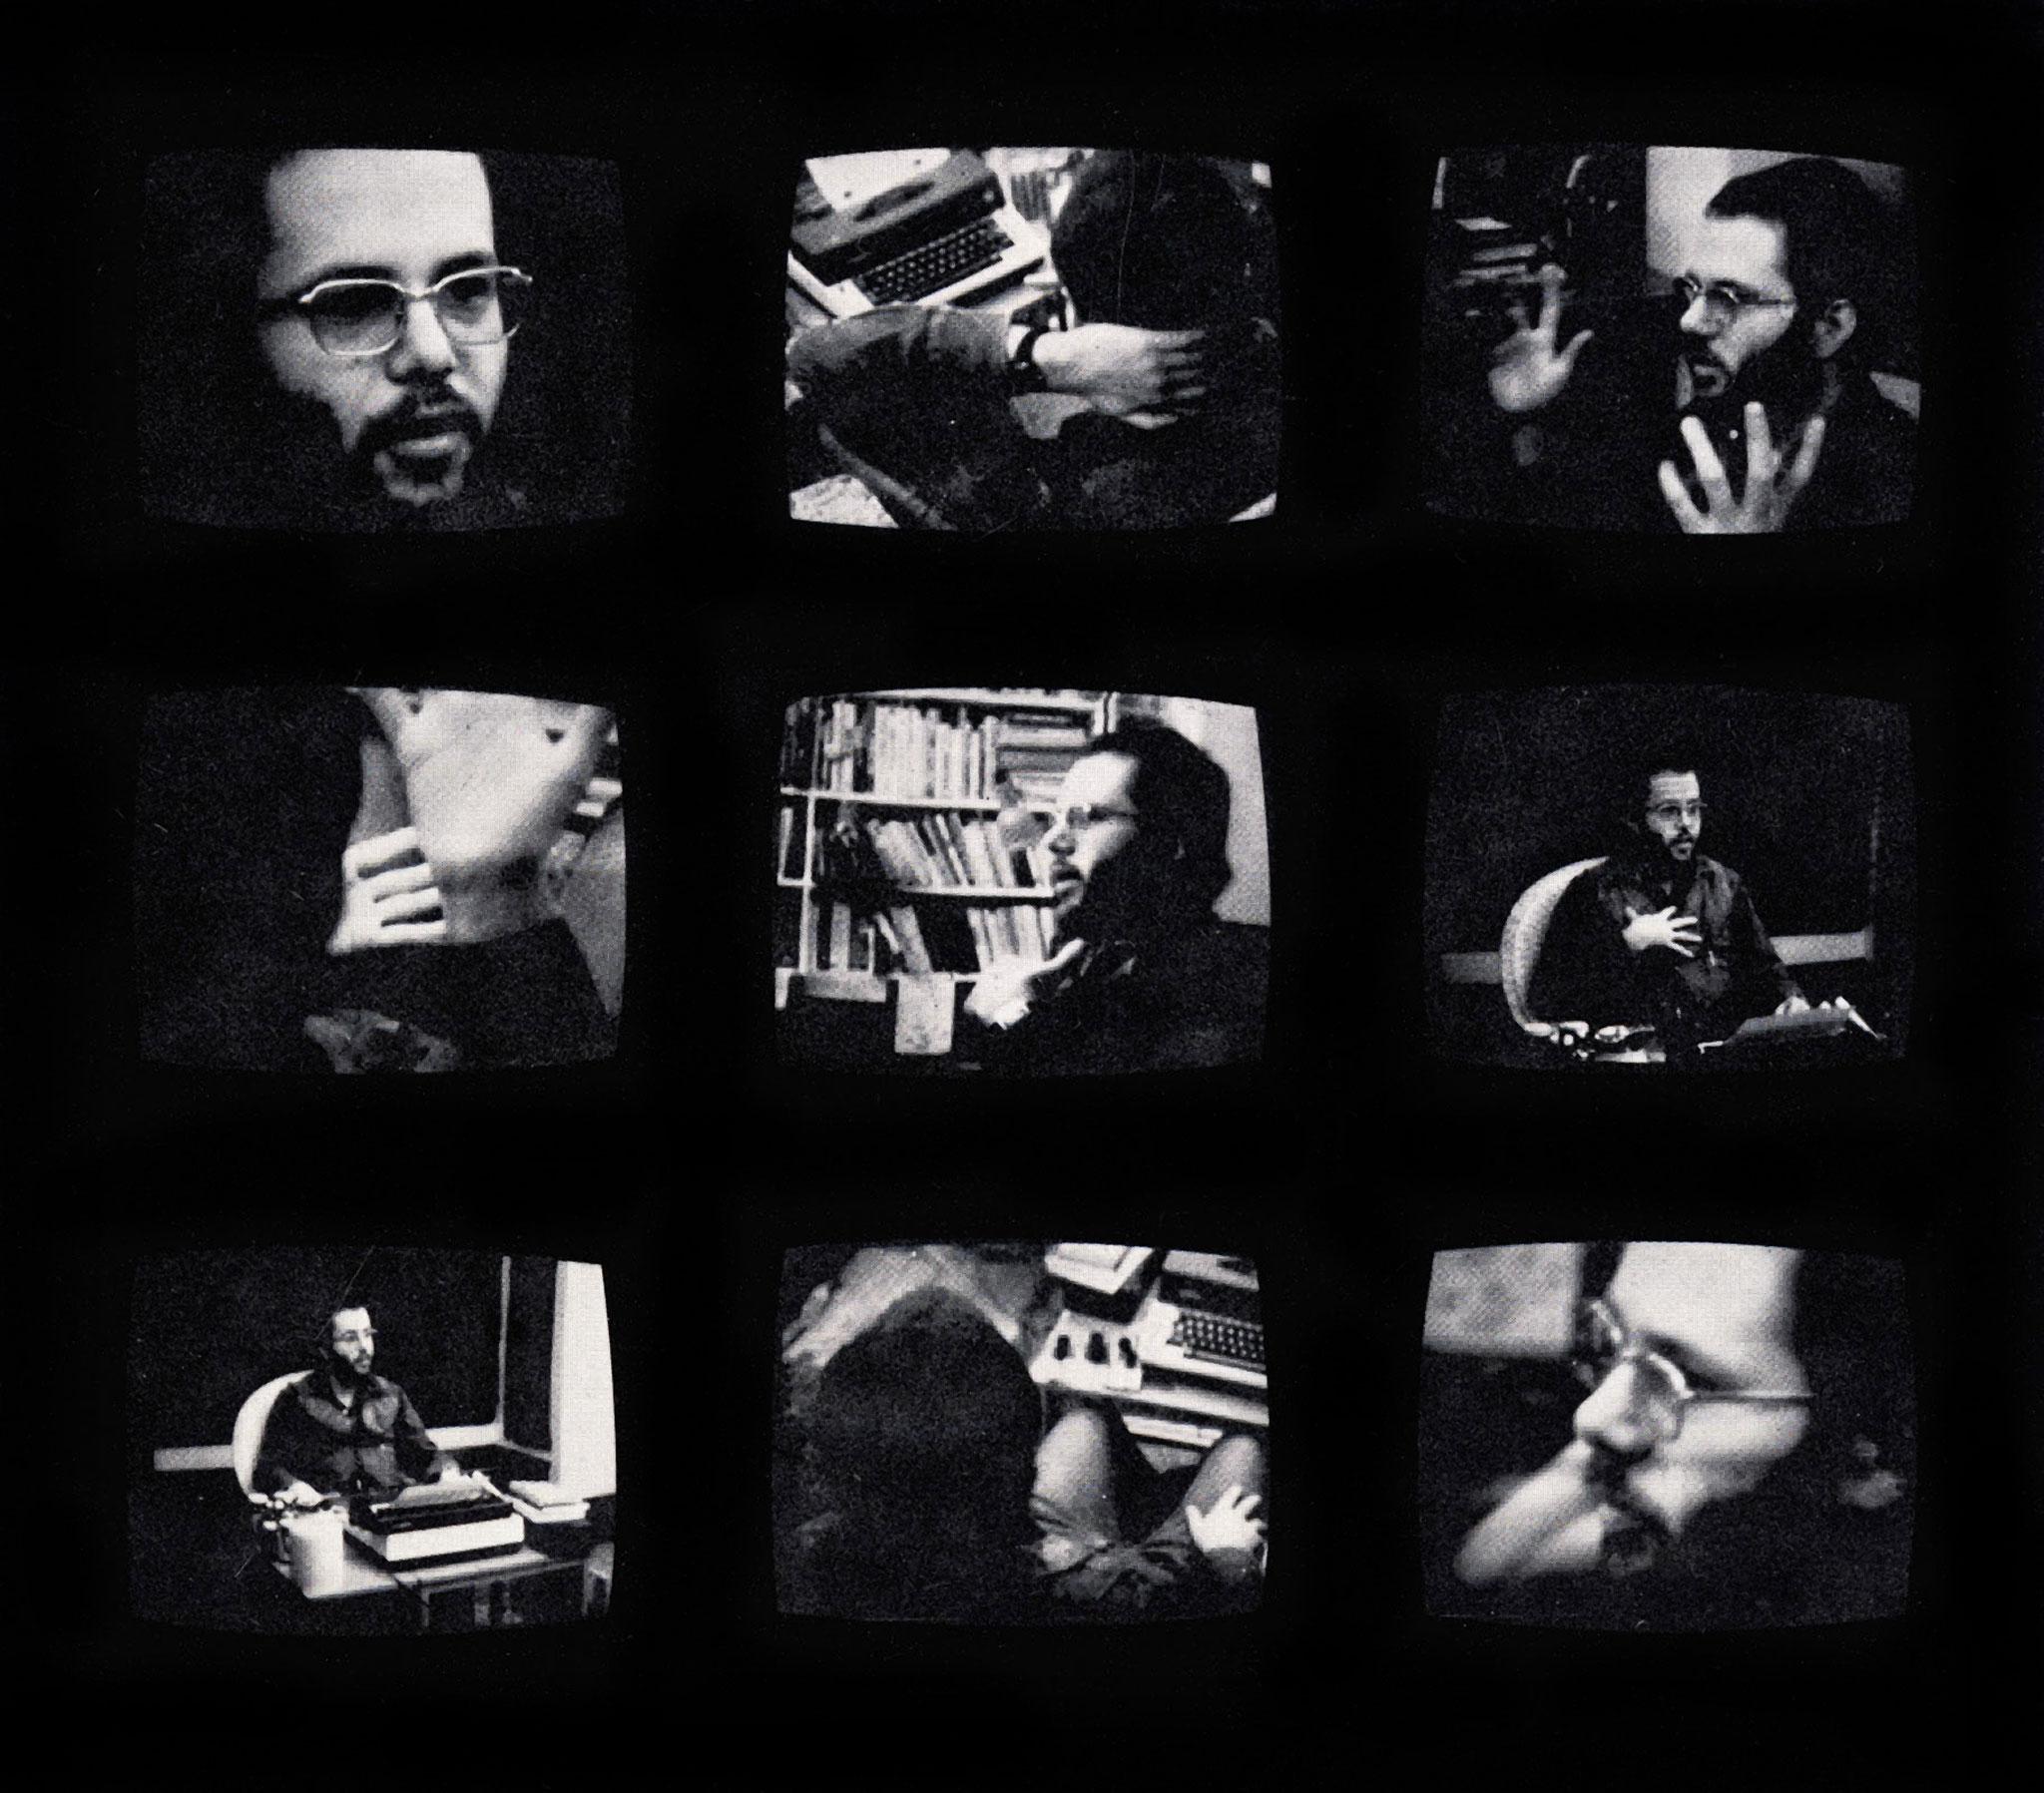 A series of nine black and white images arranged in a grid.